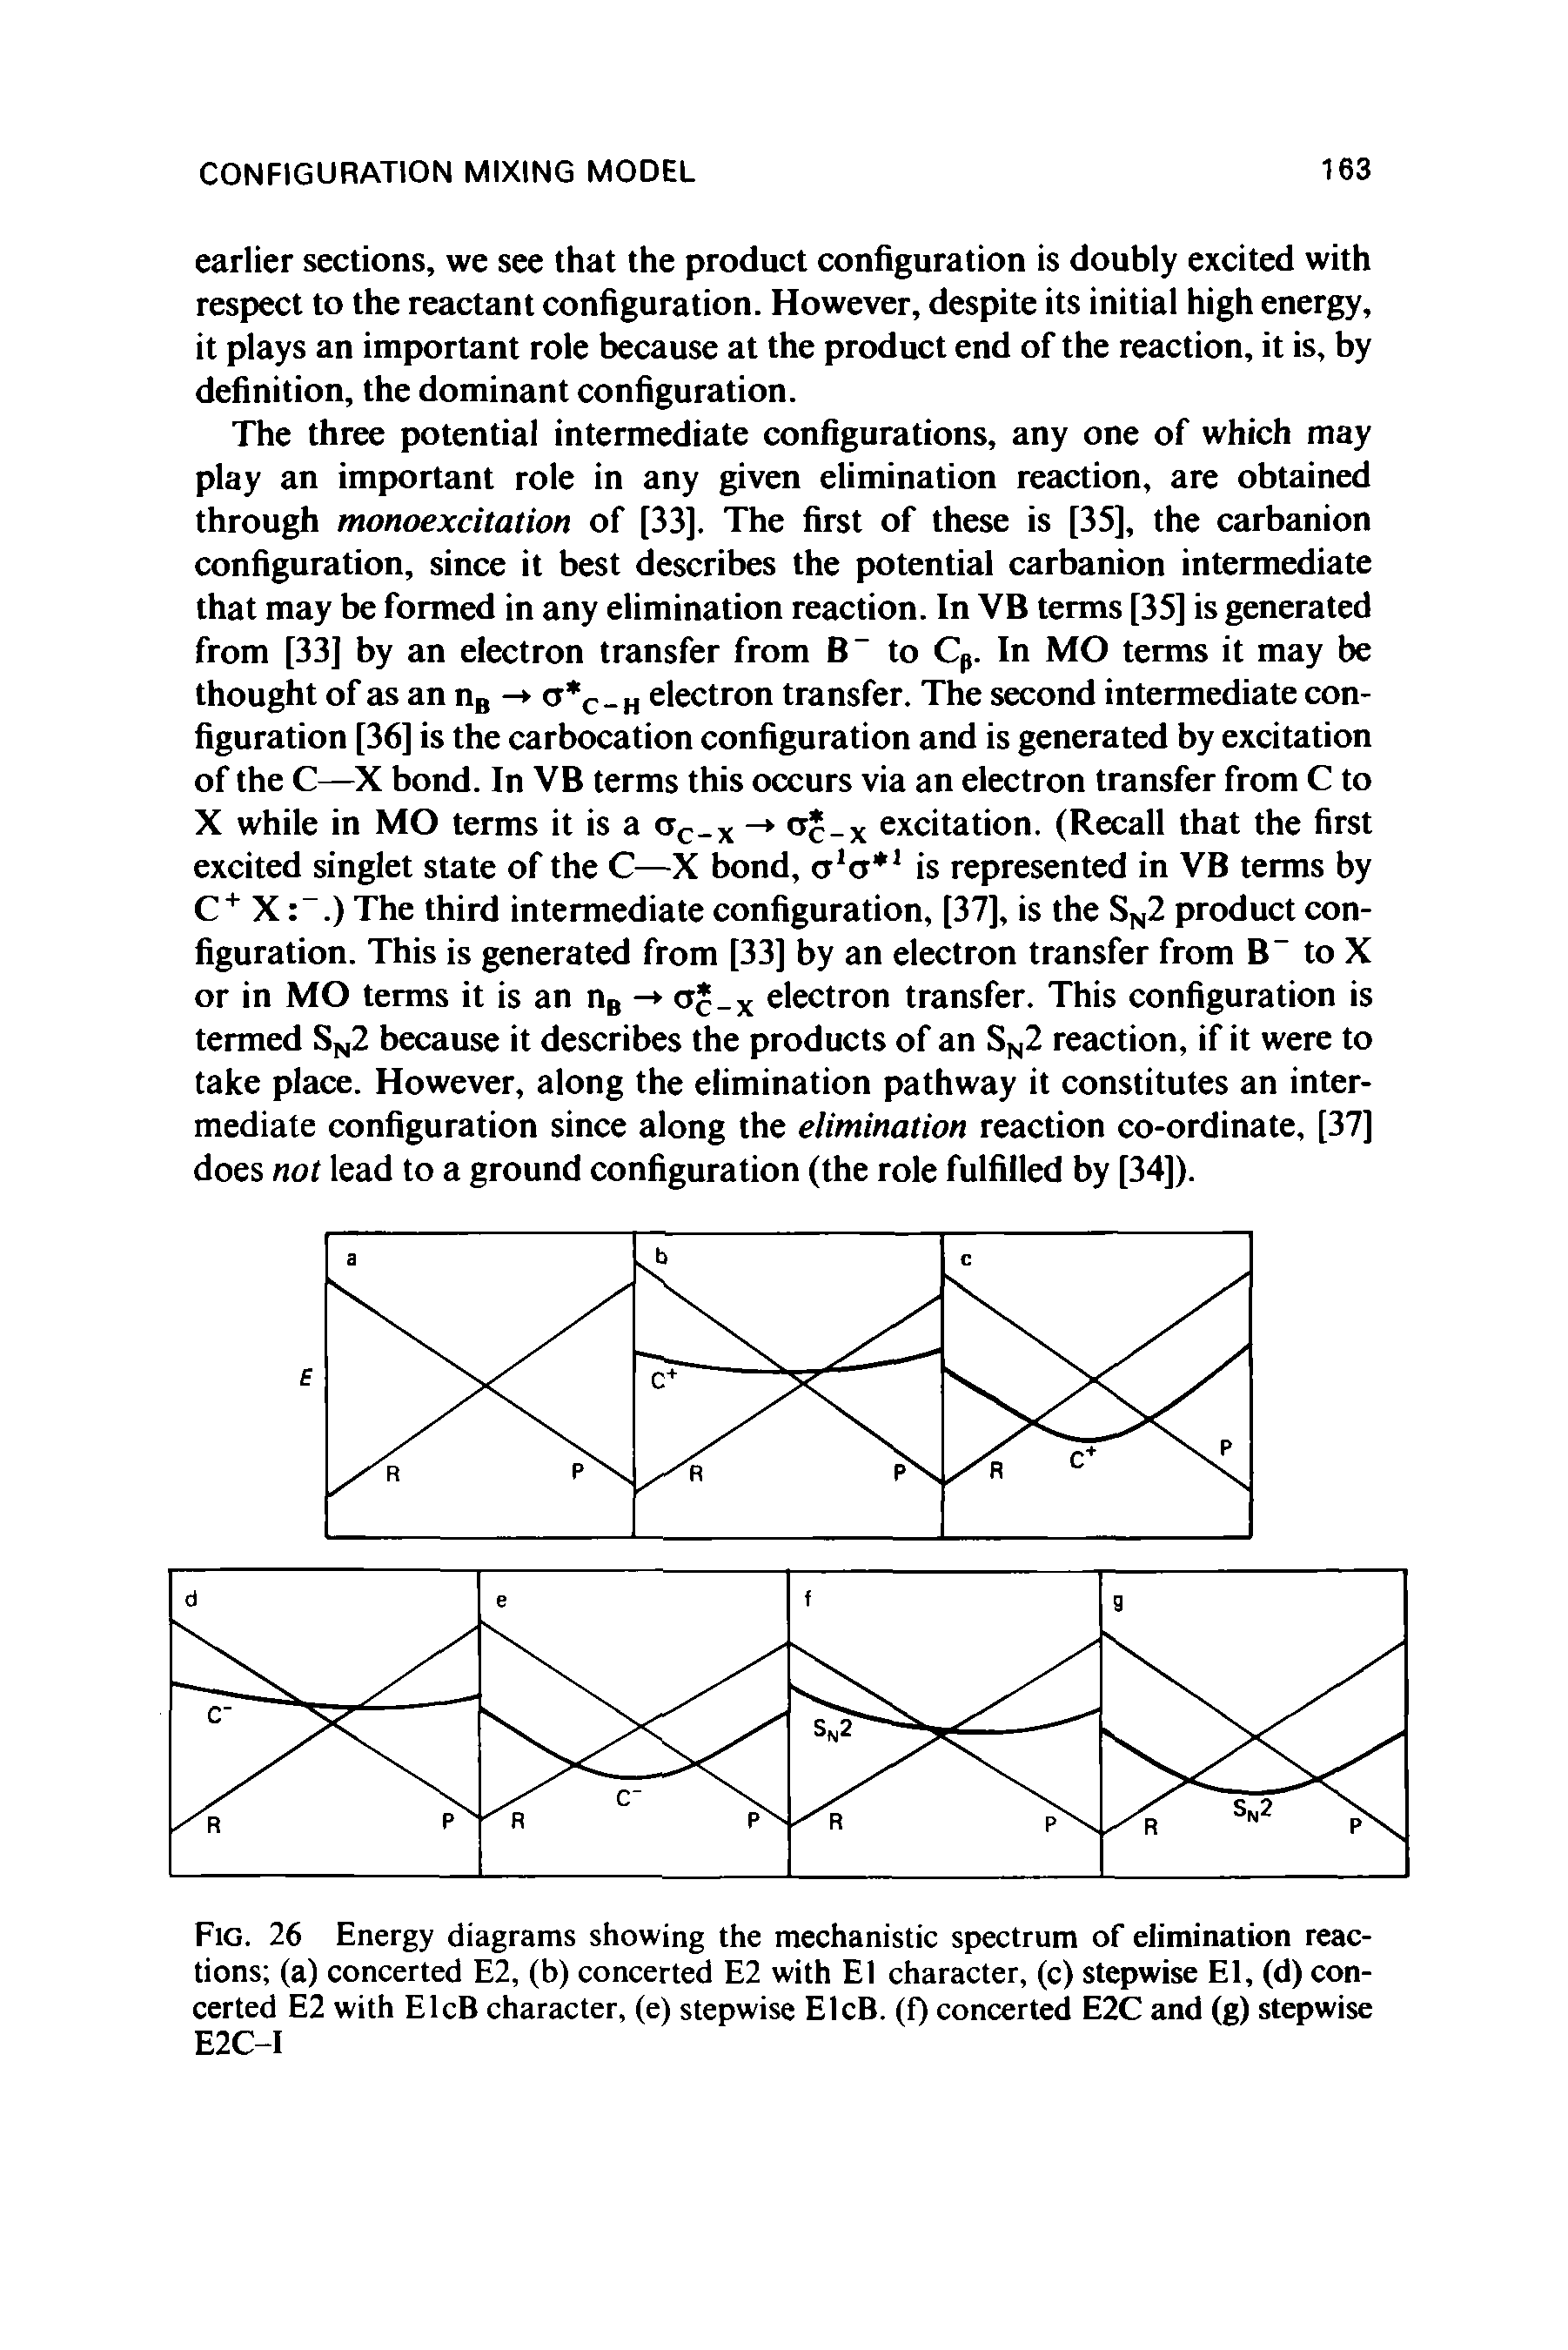 Fig. 26 Energy diagrams showing the mechanistic spectrum of elimination reactions (a) concerted E2, (b) concerted E2 with El character, (c) stepwise El, (d) concerted E2 with ElcB character, (e) stepwise ElcB. (f) concerted E2C and (g) stepwise E2C-I...